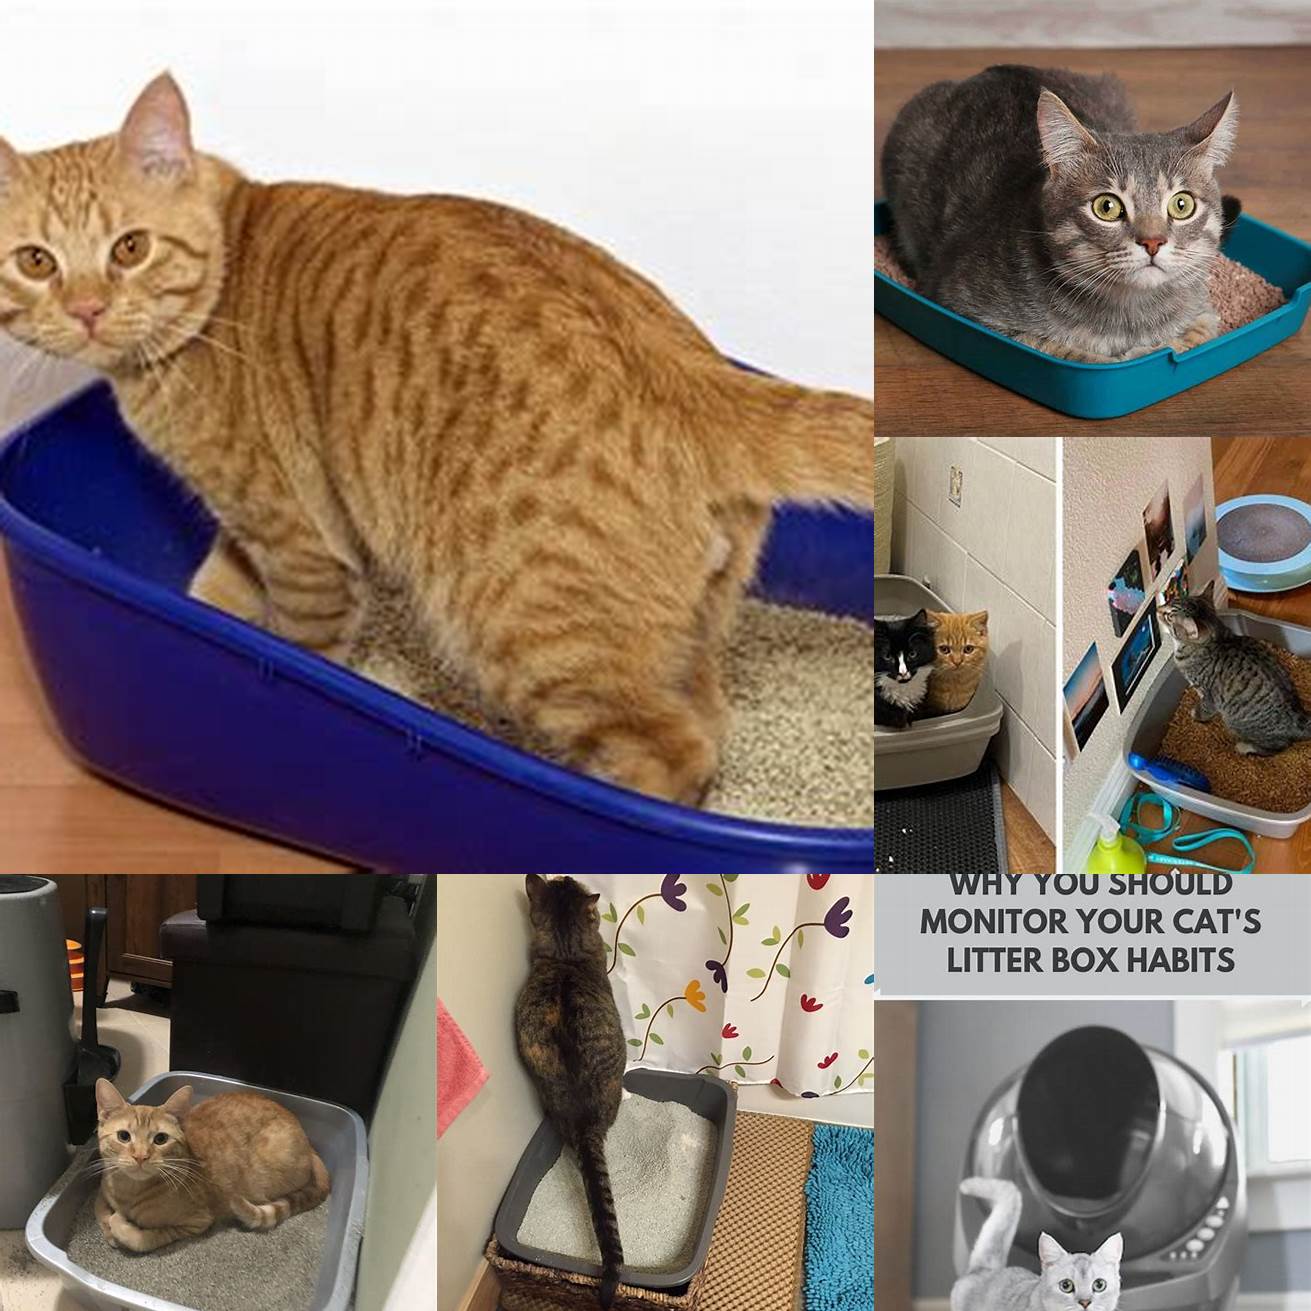 Changes in litter box habits